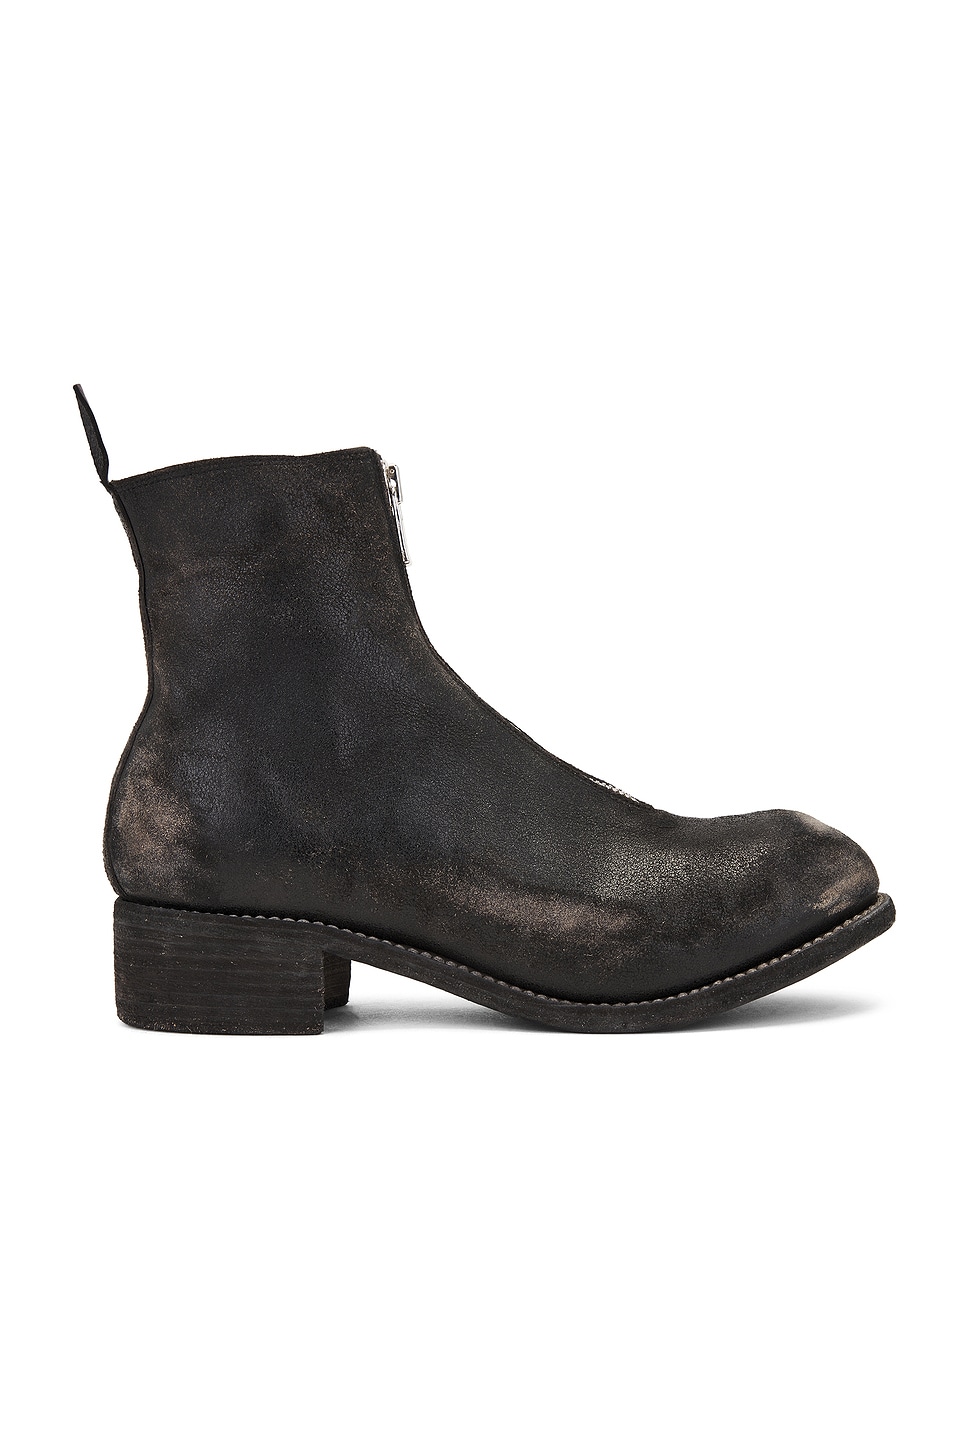 Image 1 of Guidi PL1 Coated Boot in Black